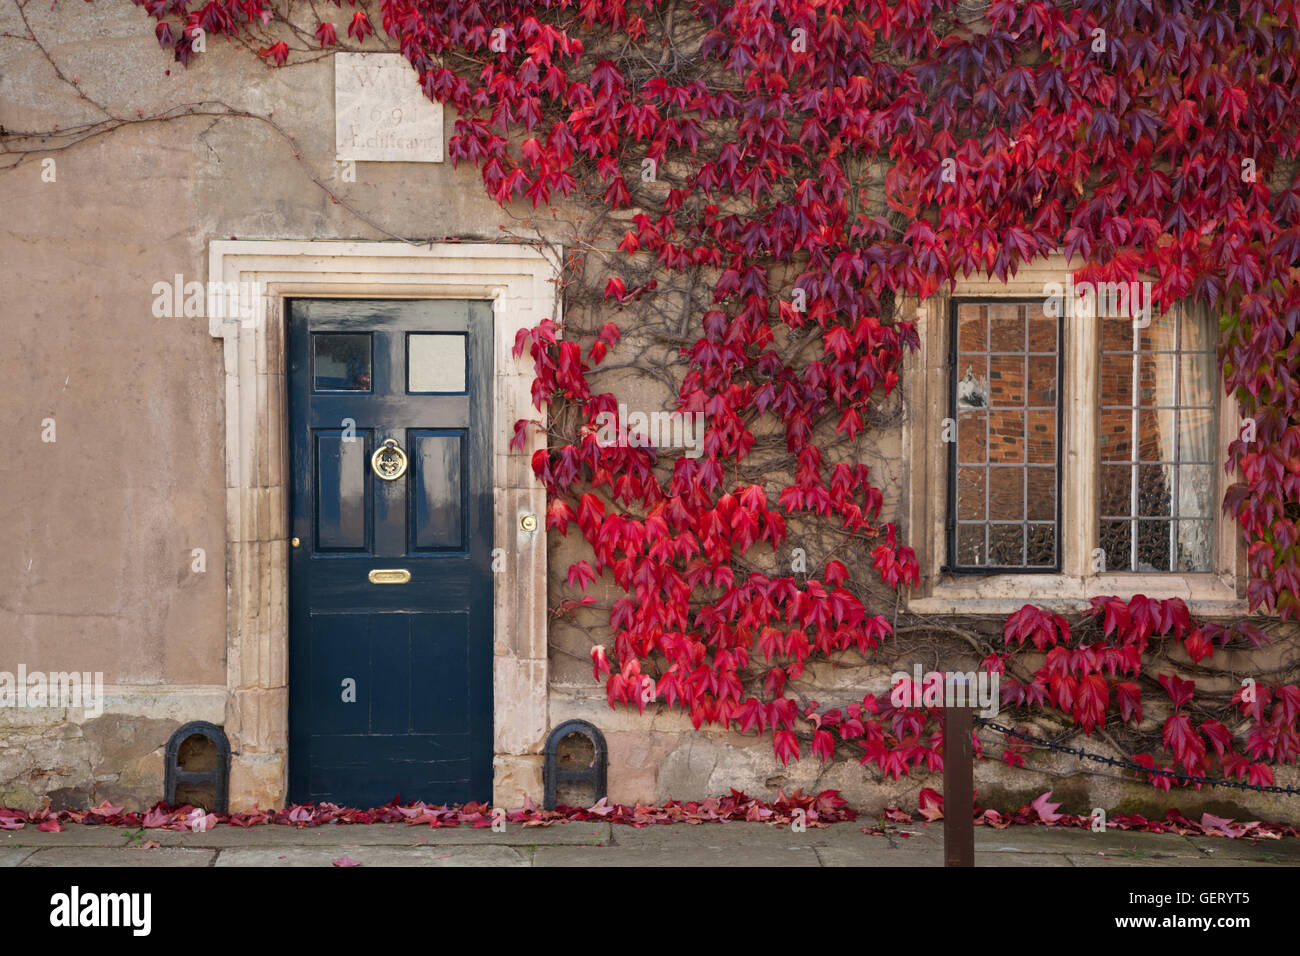 Virginia creeper frames the doorway of a house with a datestone of 1691 in Hallaton Stock Photo